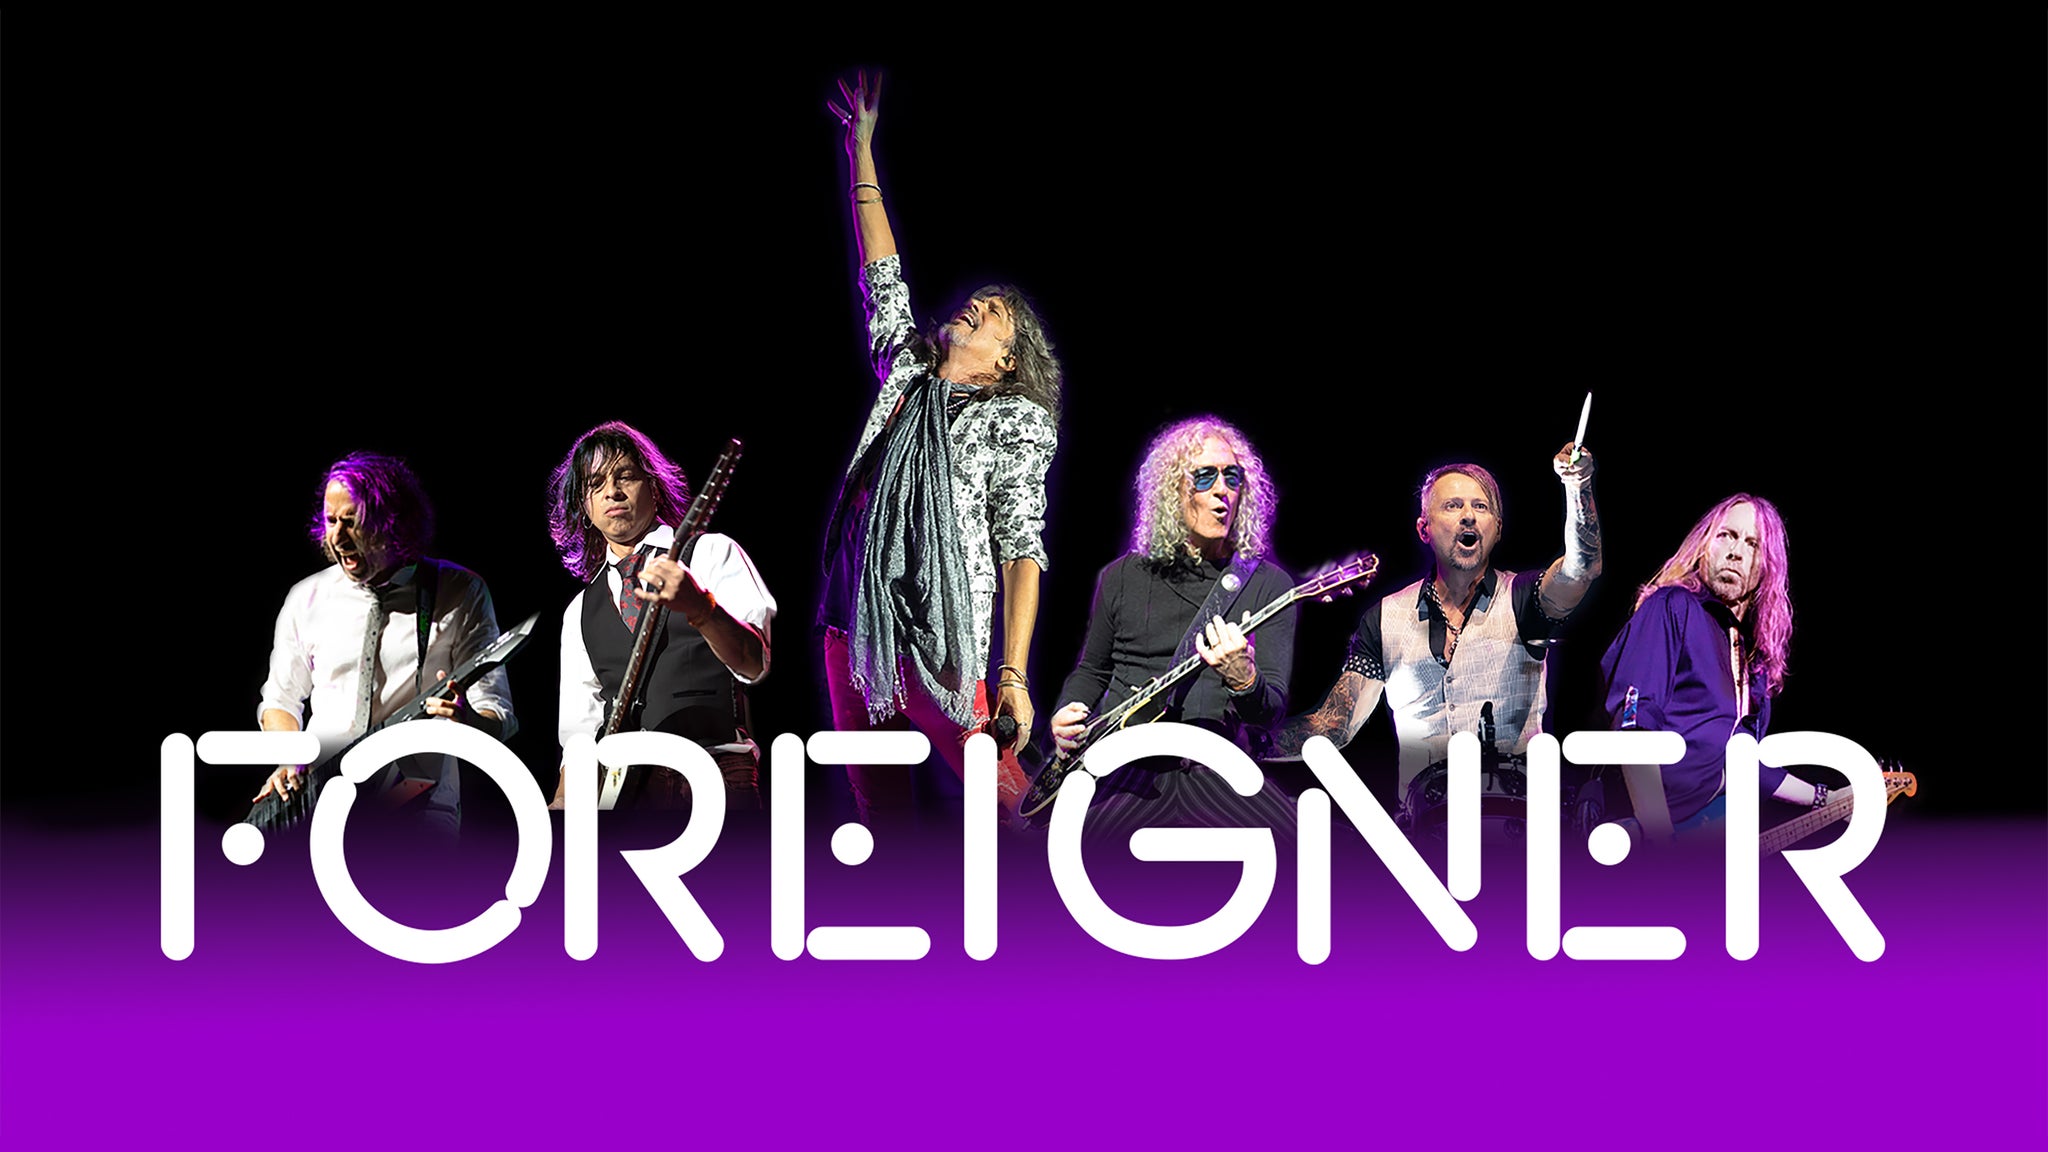 Foreigner & Styx with John Waite - Renegades and Juke Box Heroes Tour